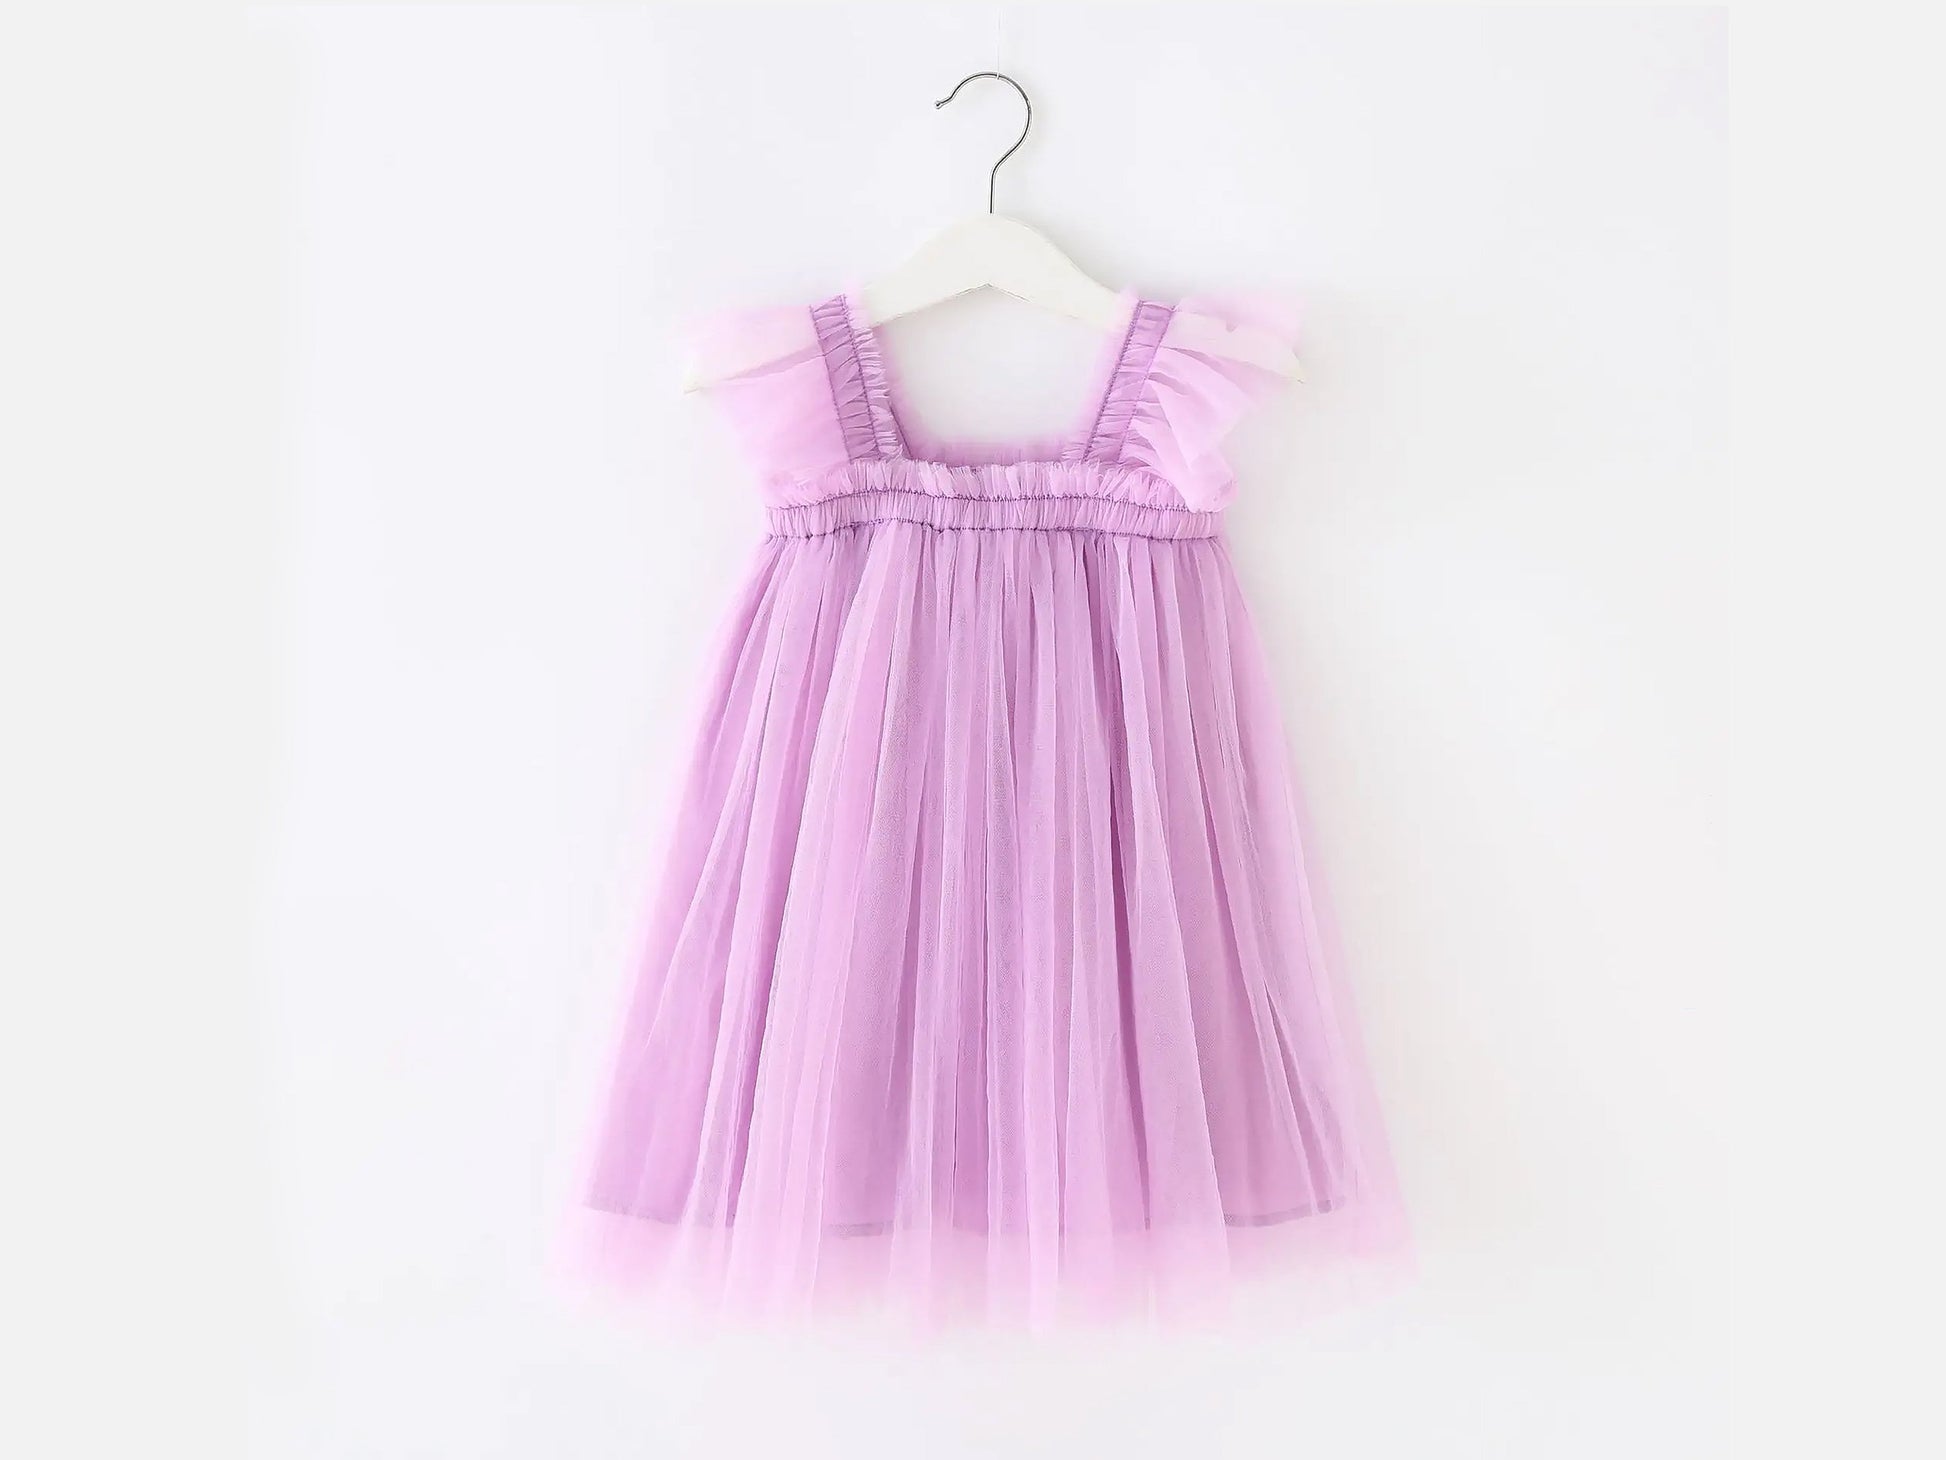 Baby Tulle Dress, Lavender Tulle Dress, Daisy Tutu Dress, Princess Out